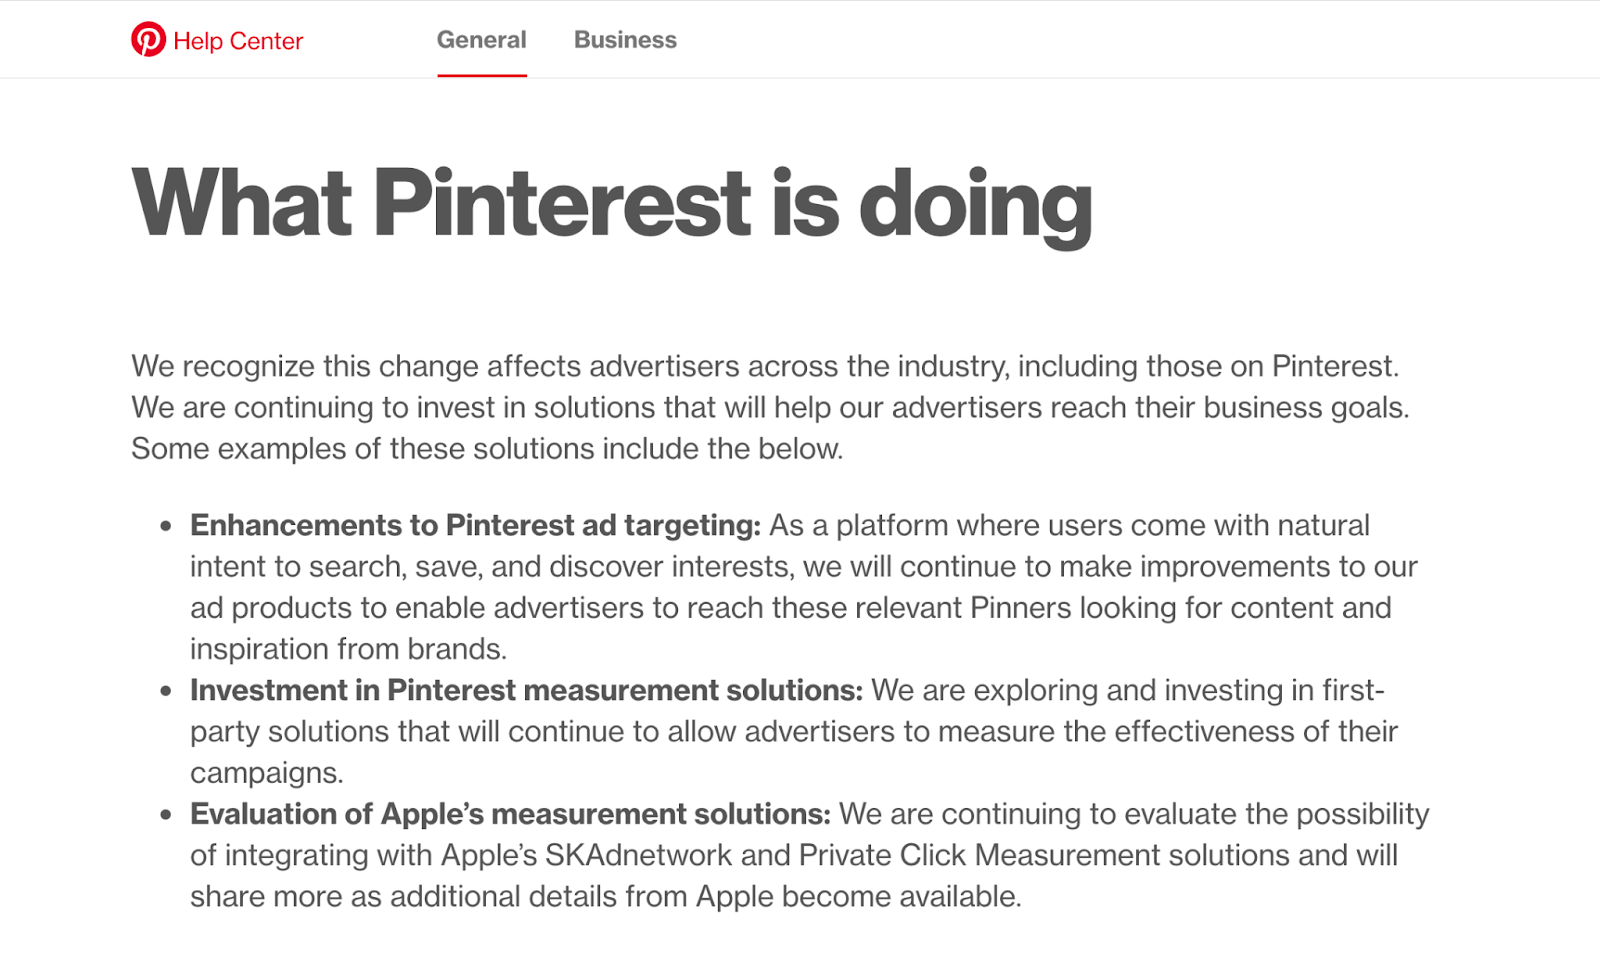 Pinterest's suggestions for marketing adjustments 